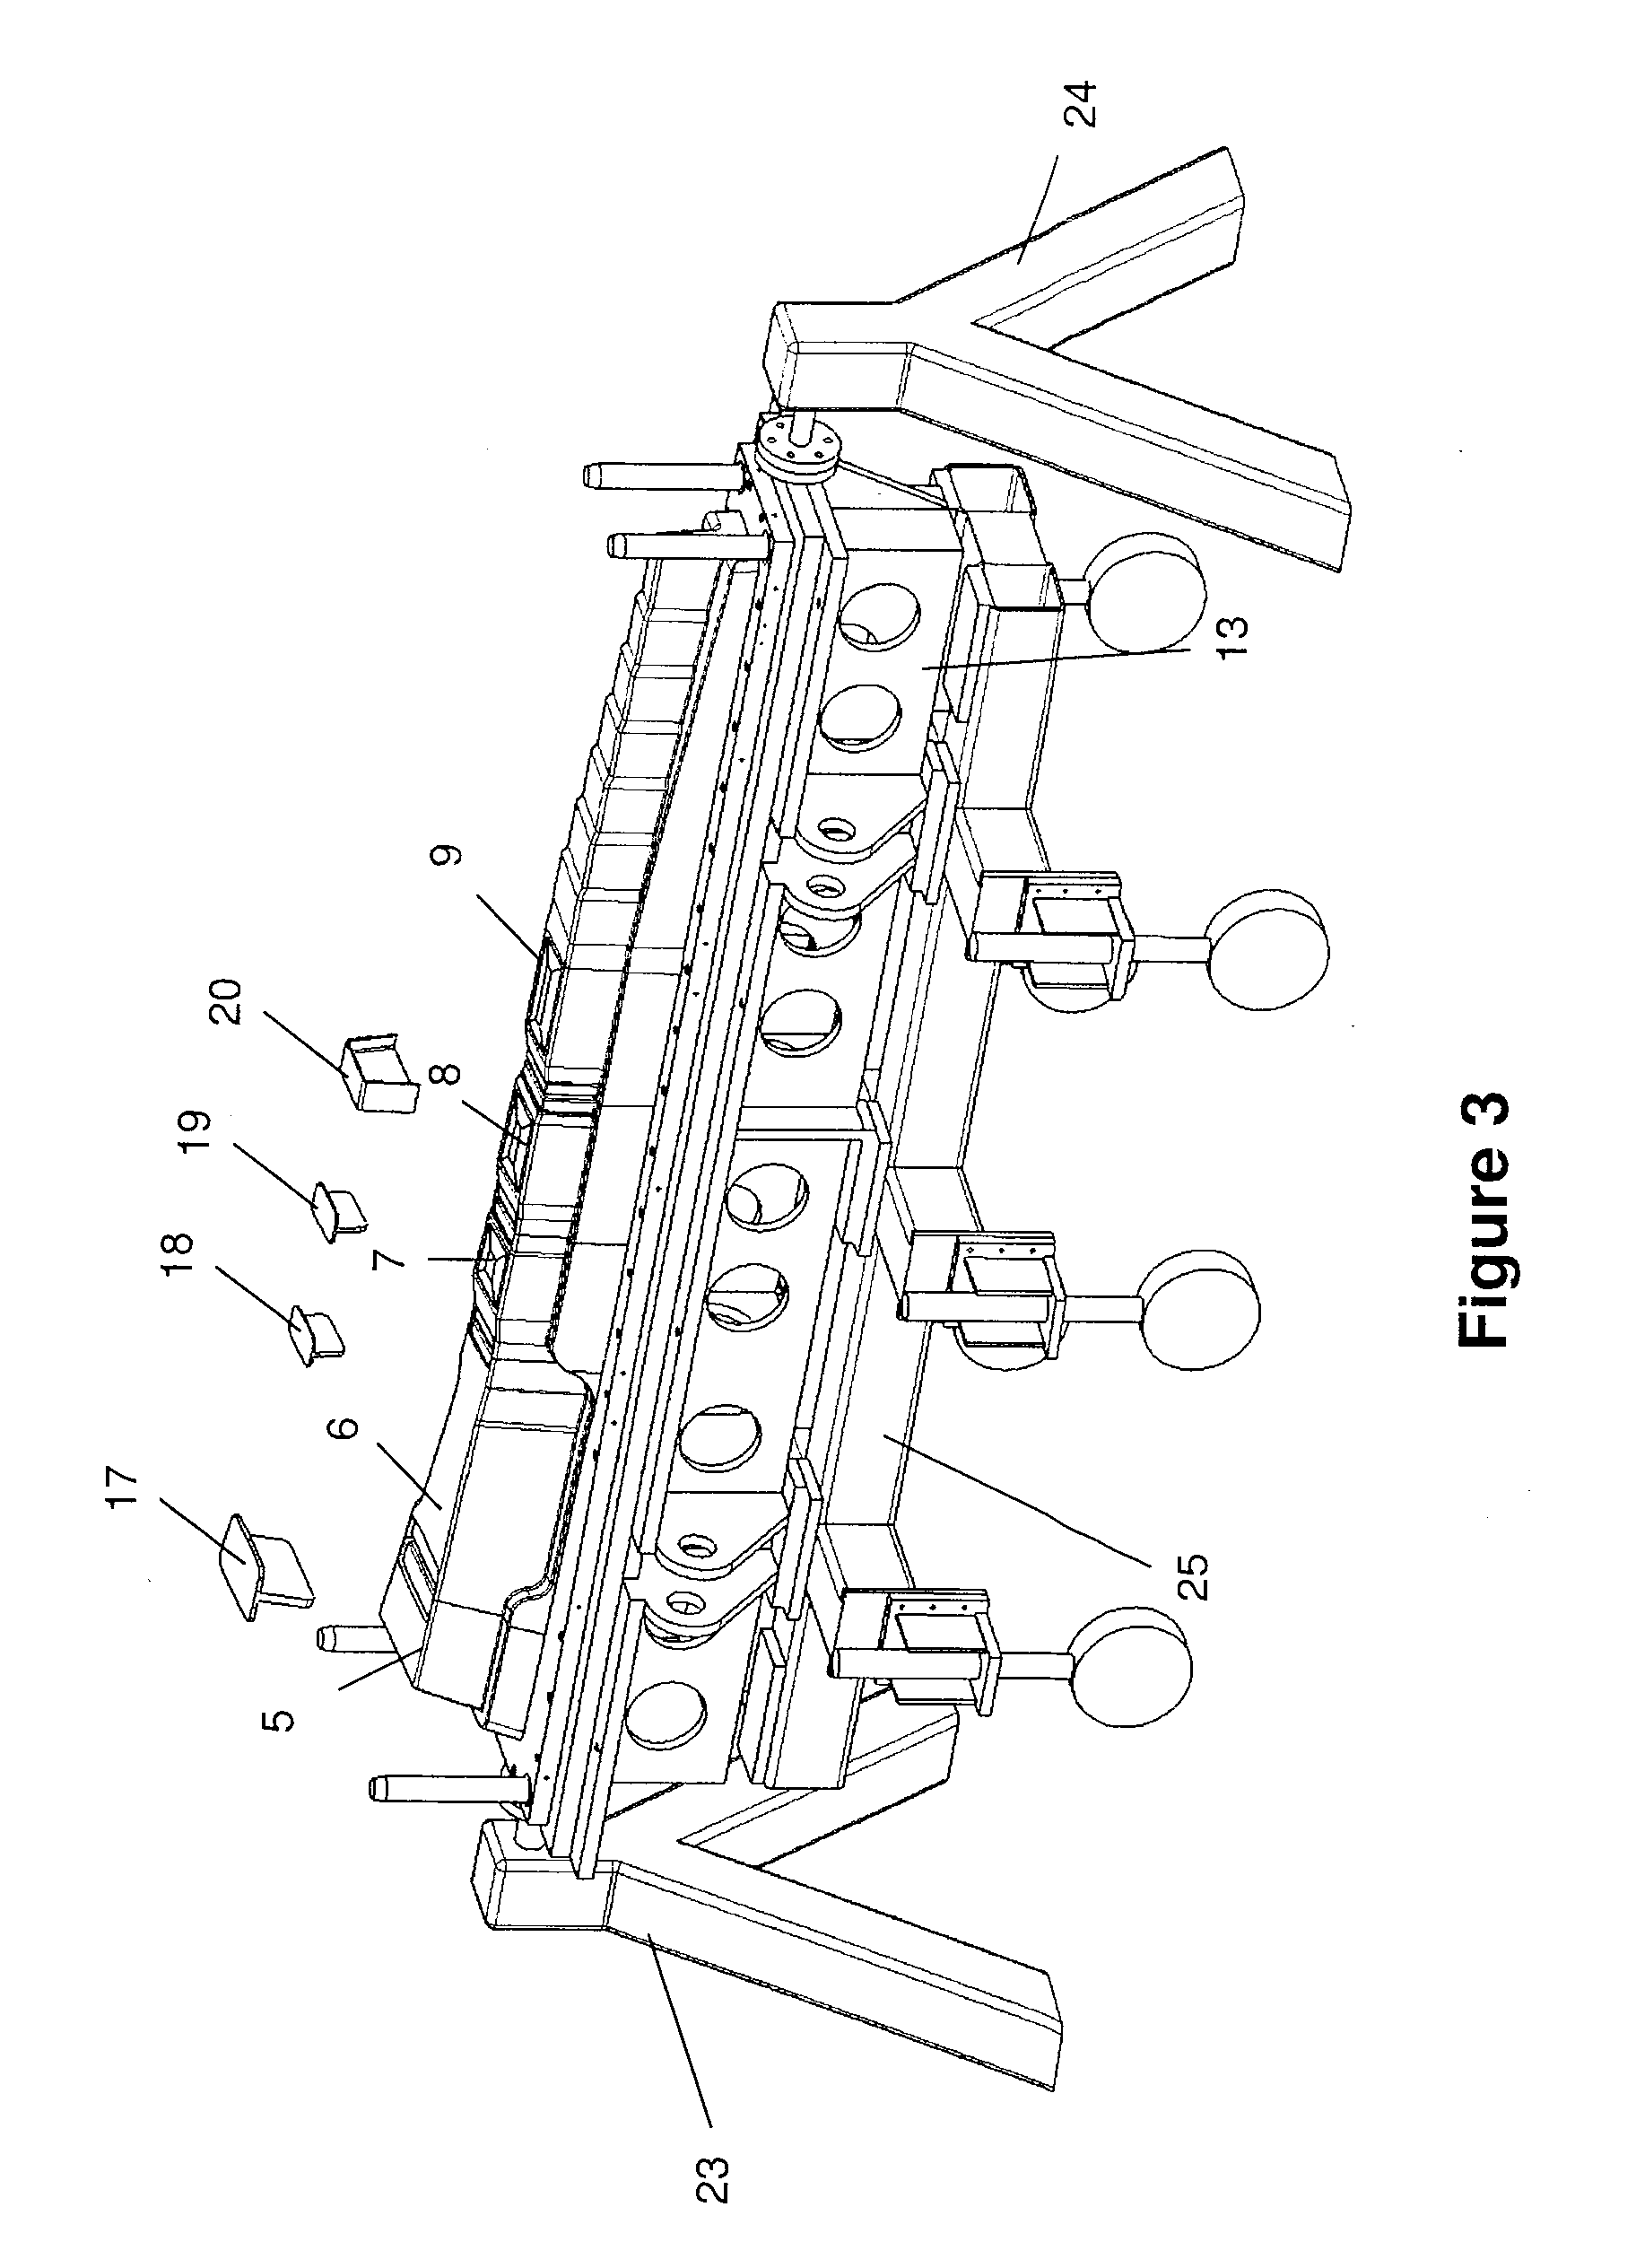 Method of manufacturing a composite element